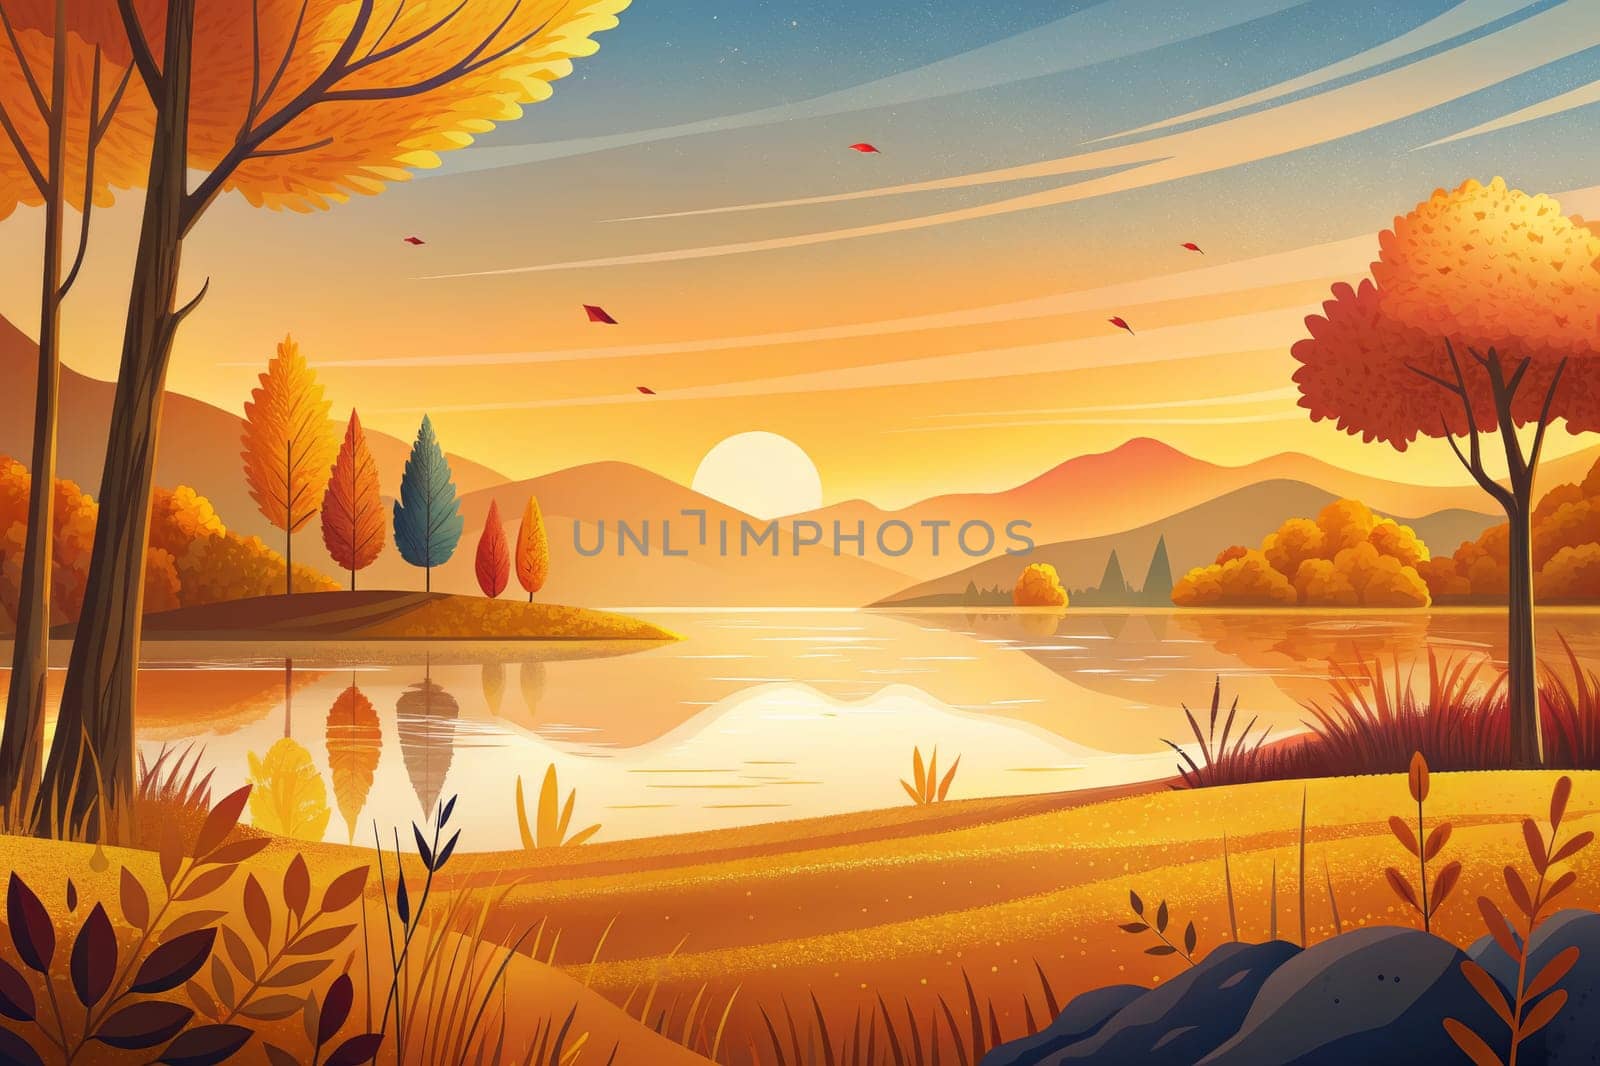 A serene lake nestled amongst rolling hills, bathed in the warm glow of the setting sun. Lush foliage in vibrant autumn hues lines the banks, with reflections shimmering on the water's surface. A peaceful scene of nature's beauty, captured at the perfect moment of golden hour.